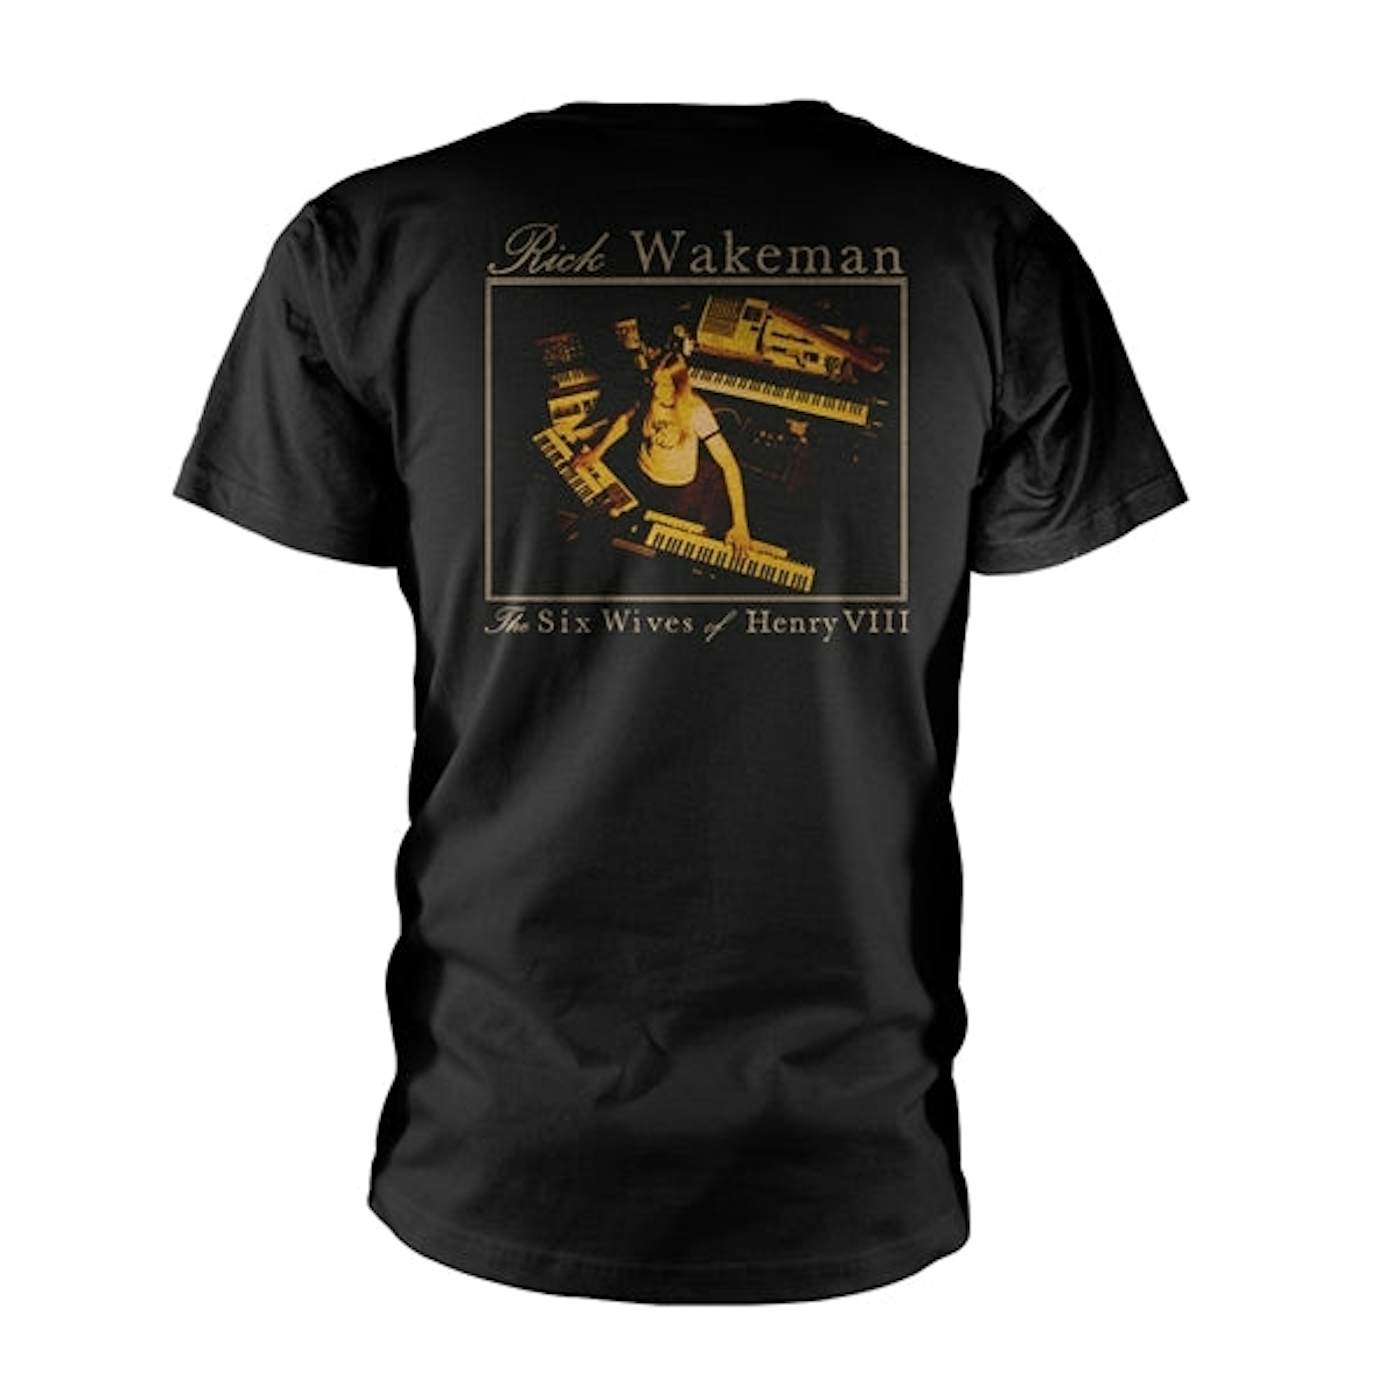 Rick Wakeman T Shirt - The Six Wives Of Henry VII